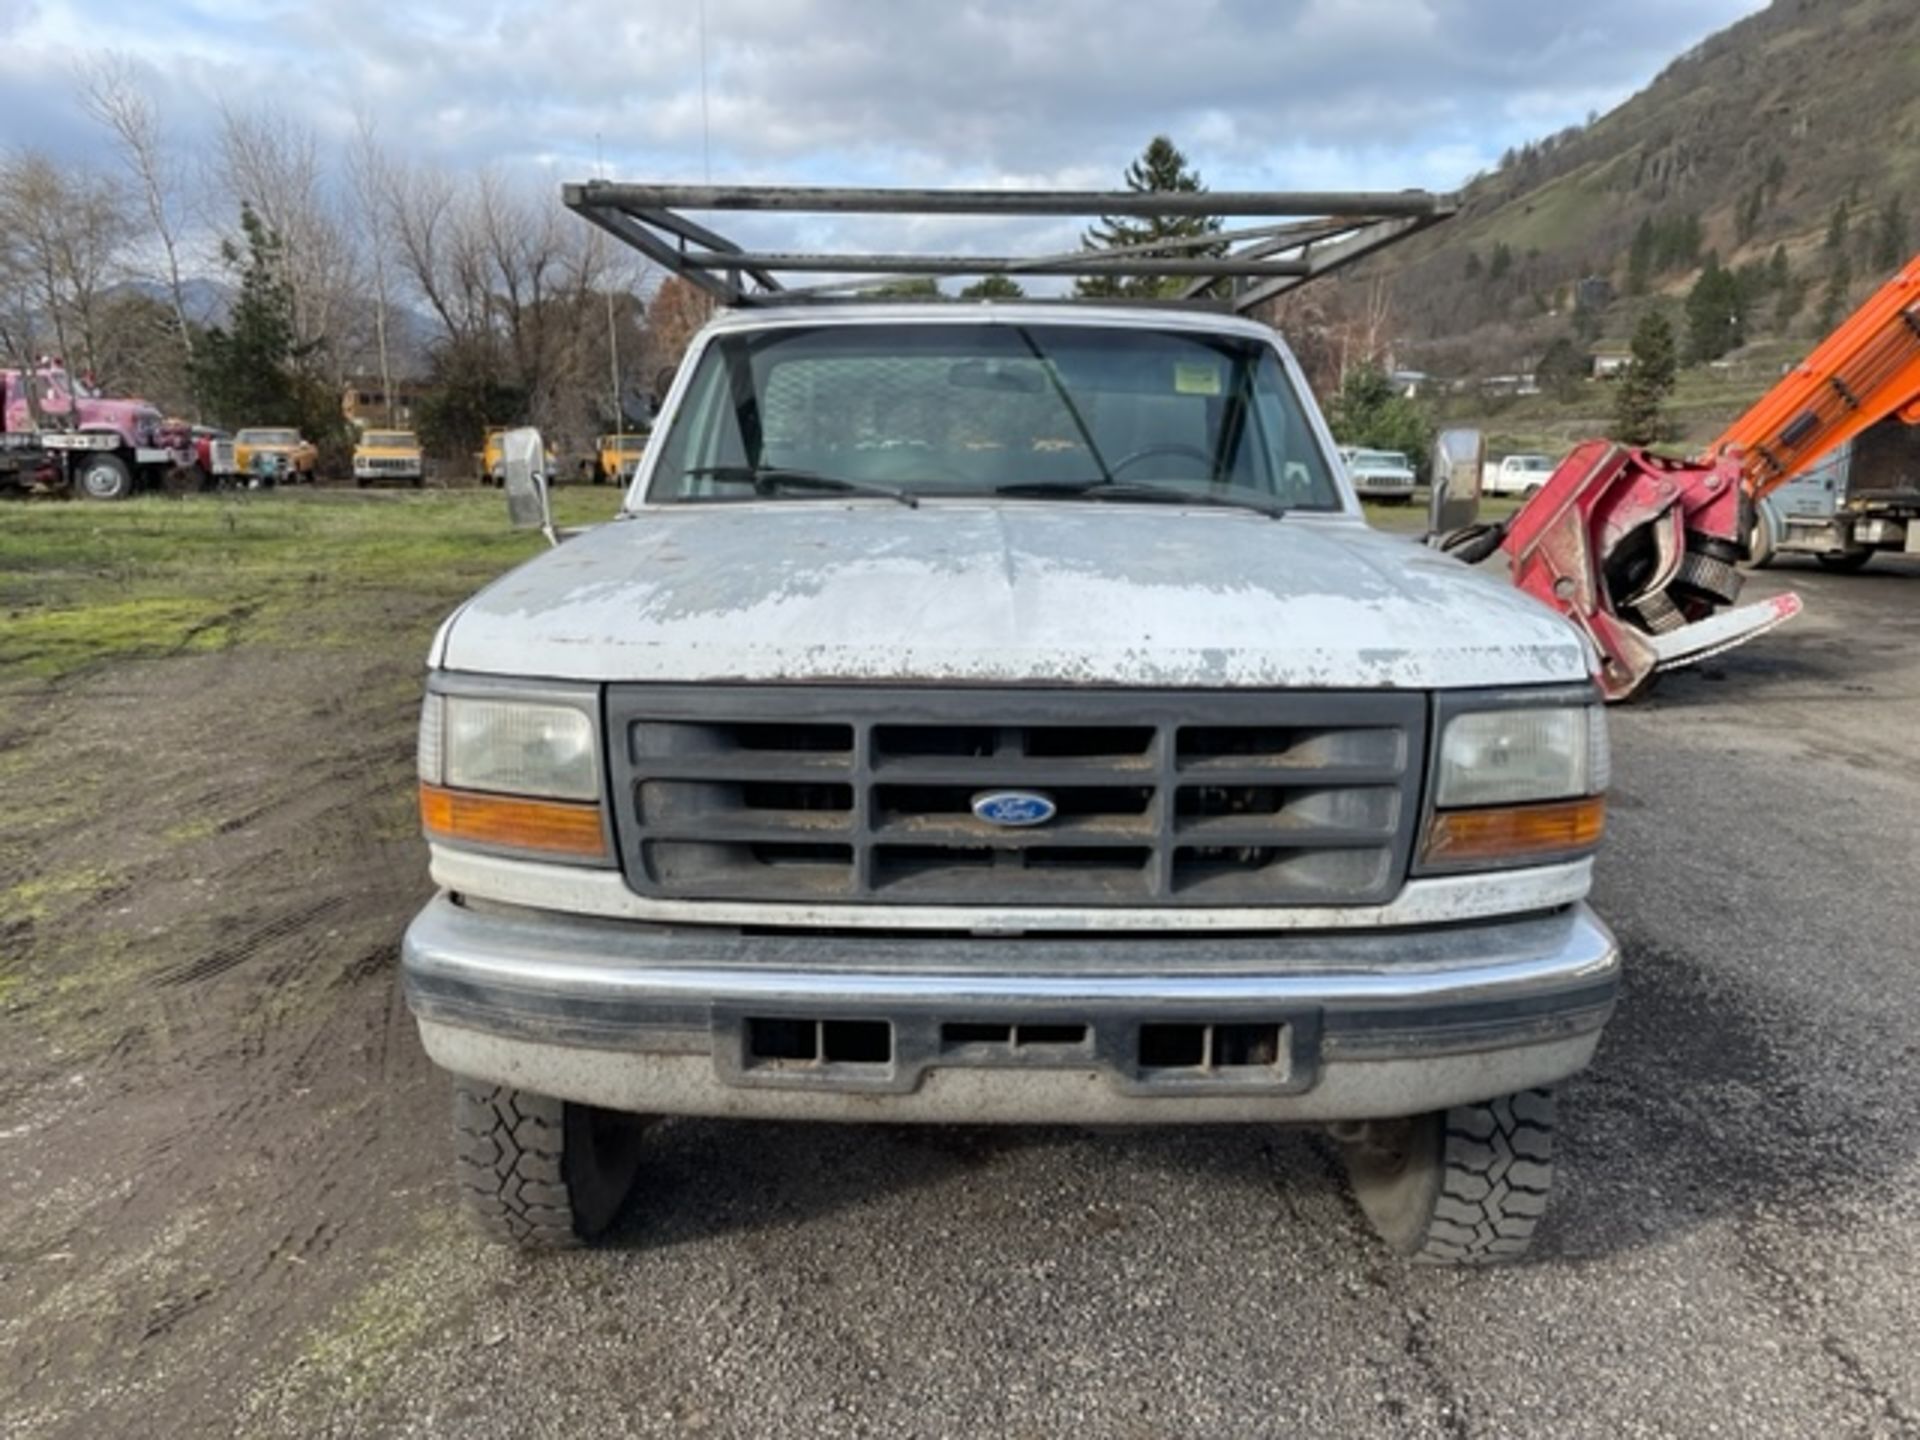 1992 Ford F350 4x4 Utility Truck - Image 8 of 21